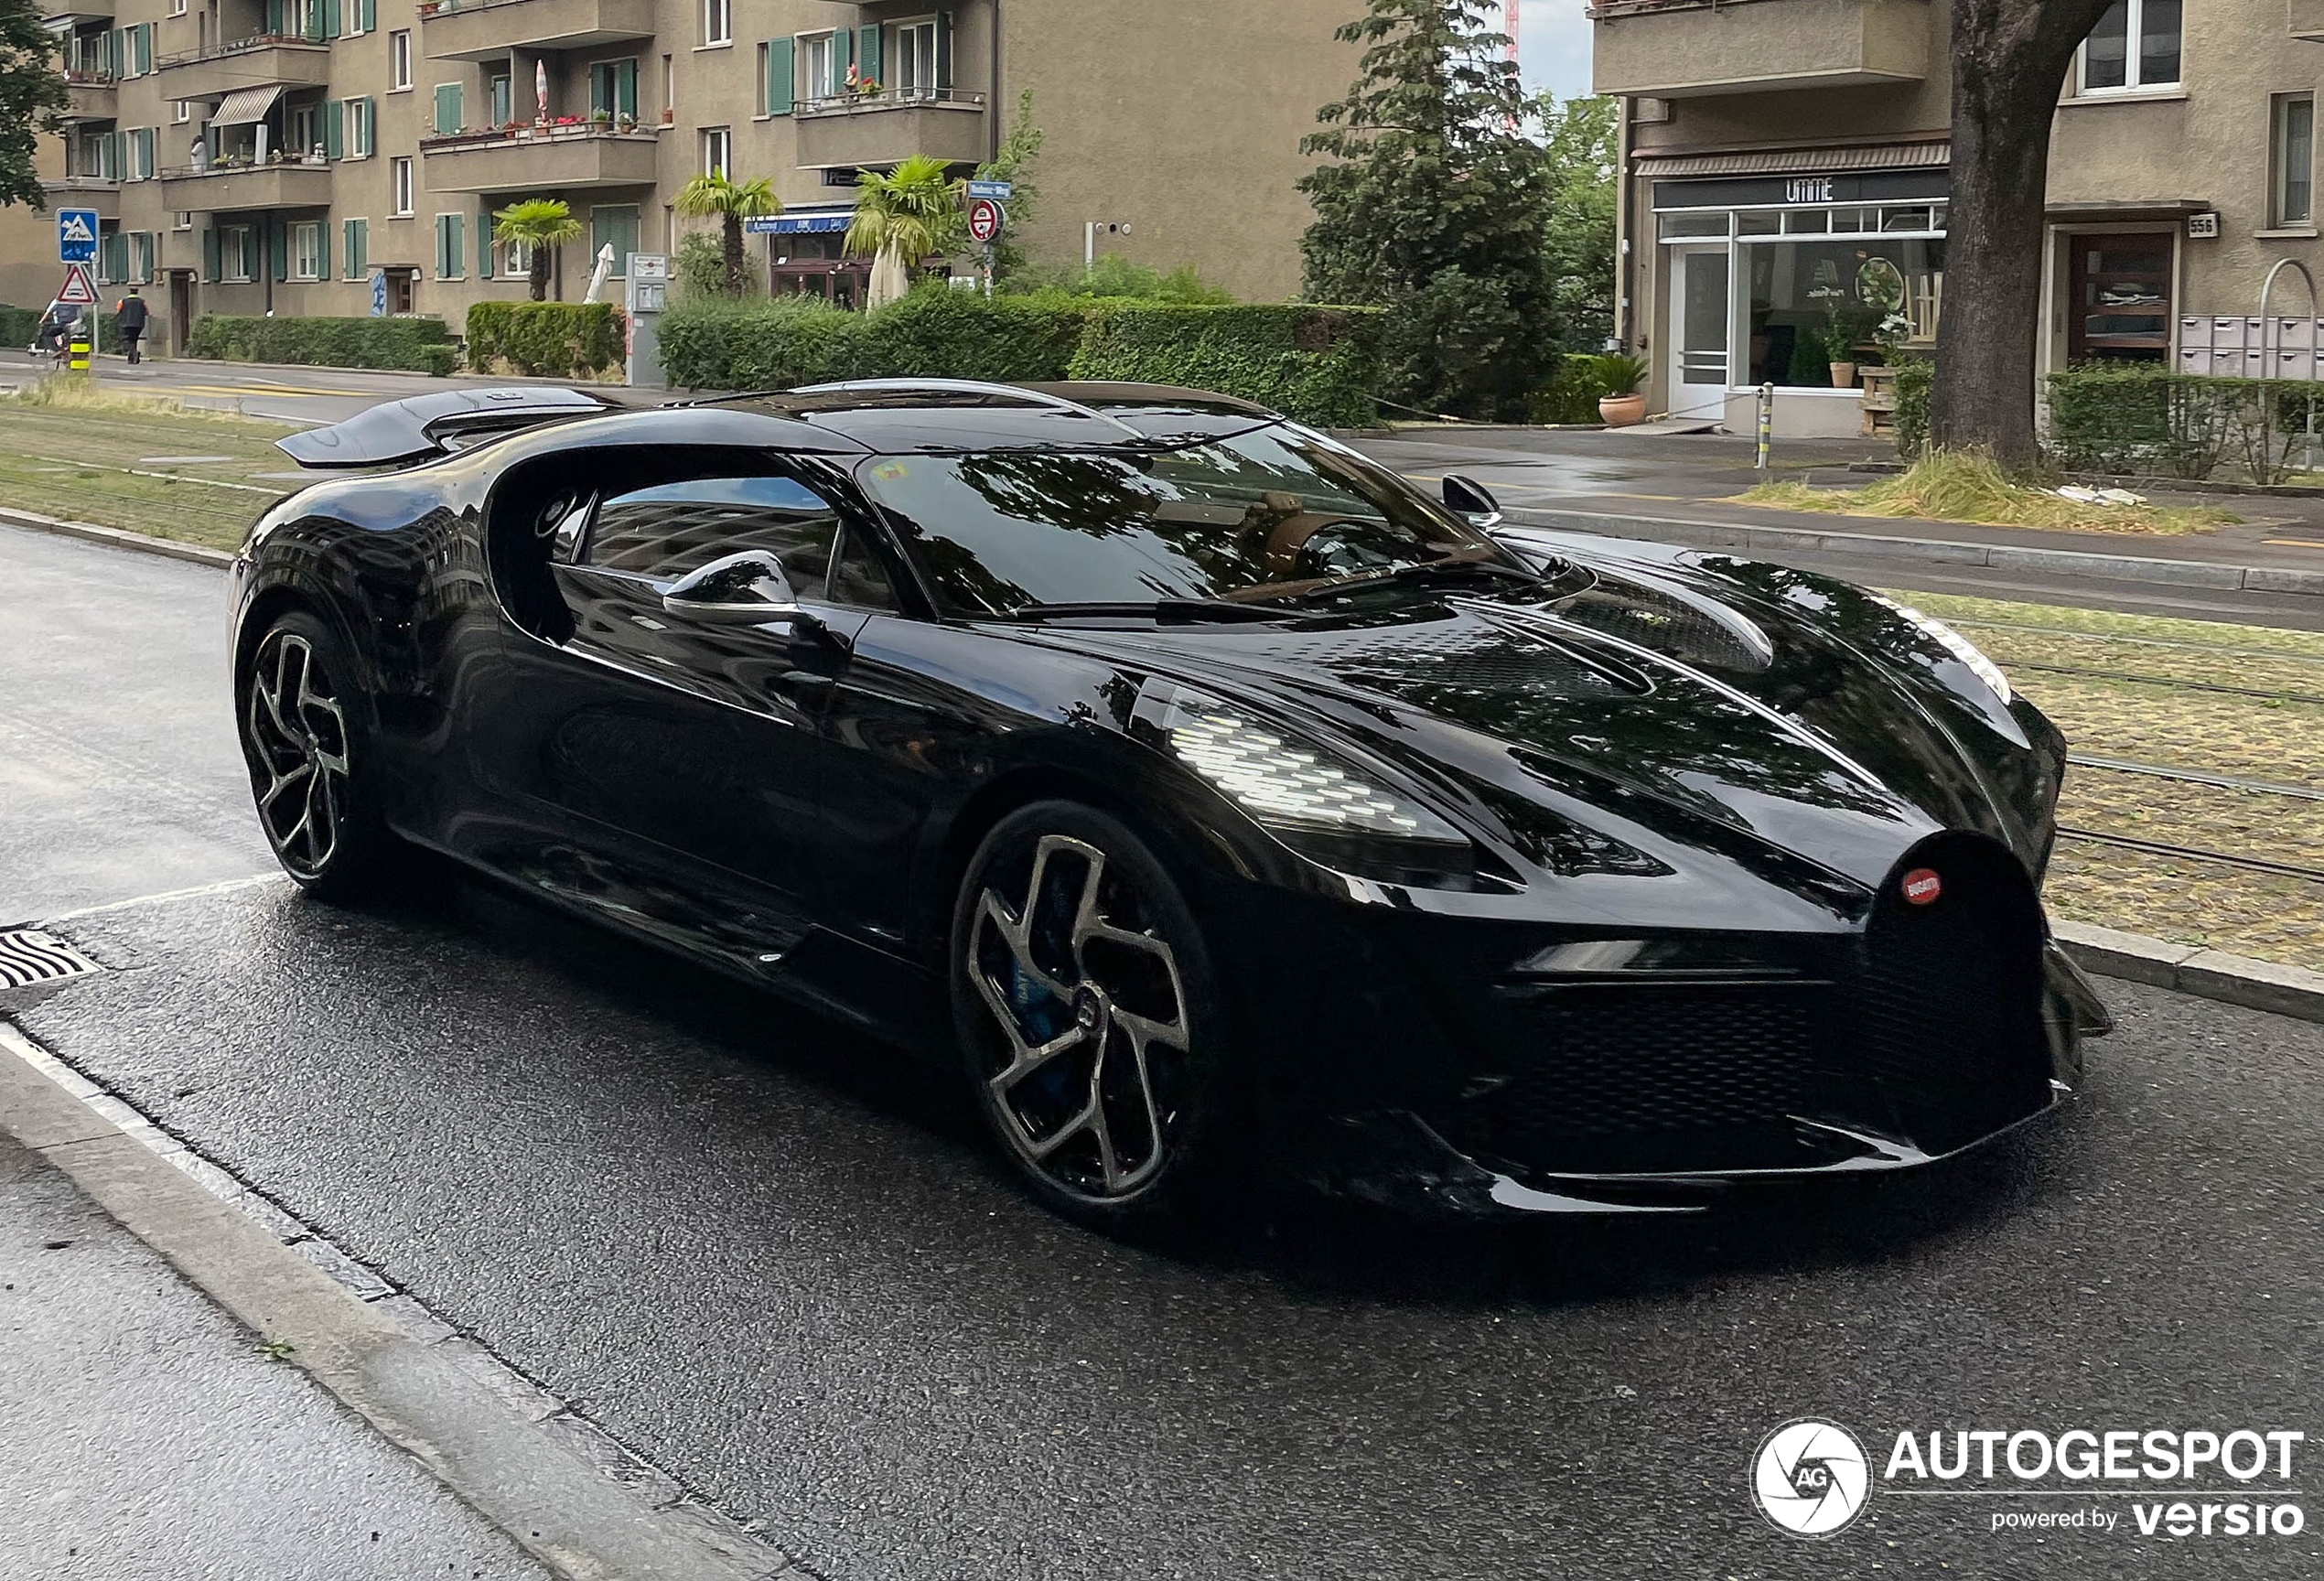 The one and only La Voiture Noire shows up in Zürich